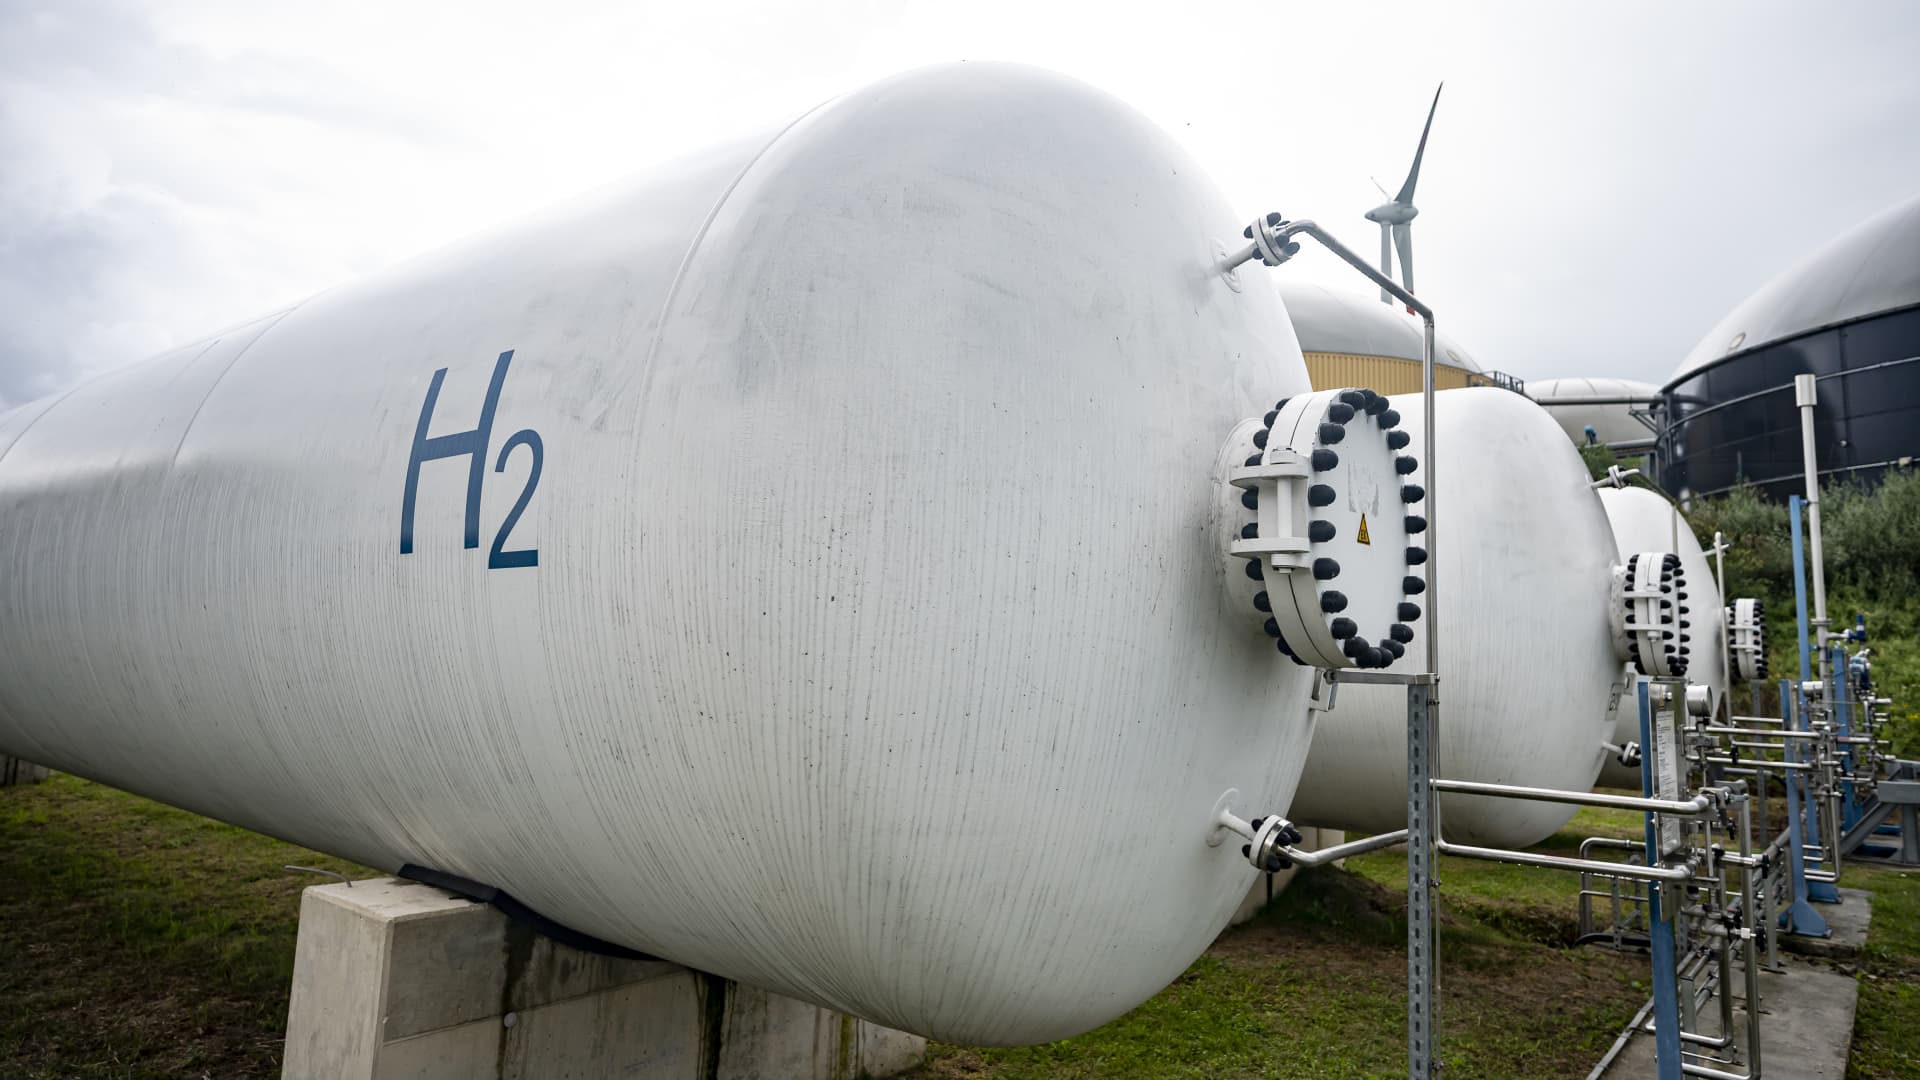 28 August 2021, Brandenburg, Prenzlau: A hydrogen tank is located in the Enertrag hybrid power plant in Brandenburg. At the Enertrag hybrid power plant, green hydrogen is produced from wind power and fed into the gas grid.